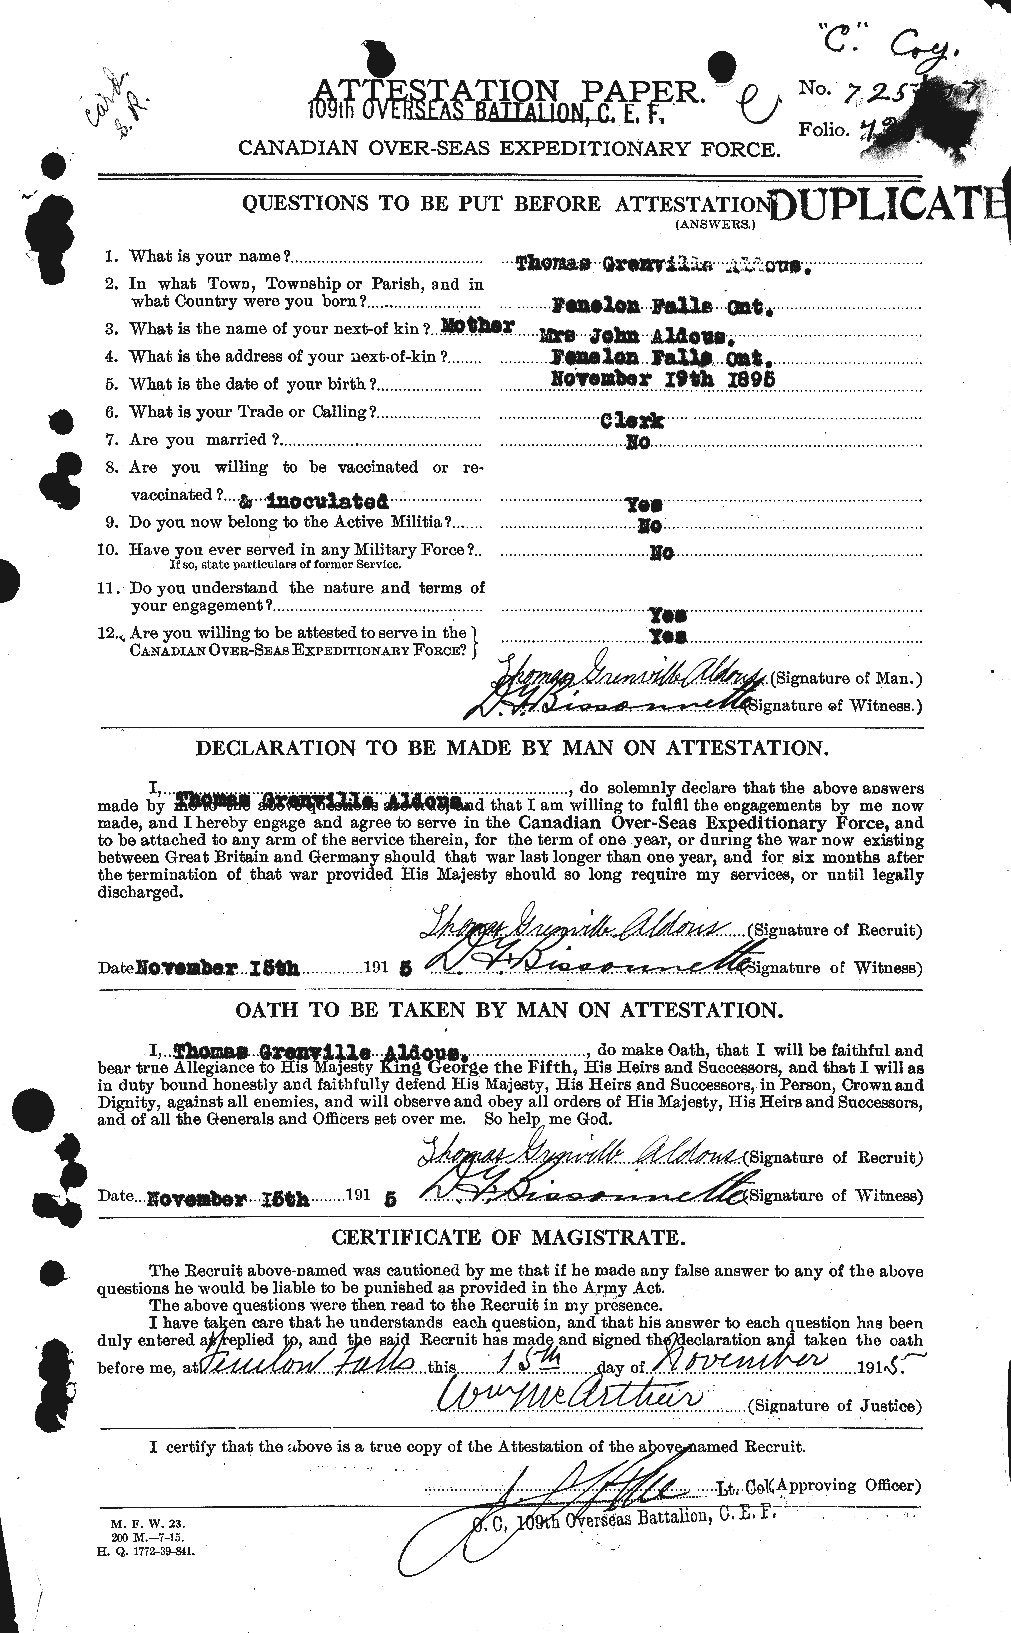 Personnel Records of the First World War - CEF 204929a